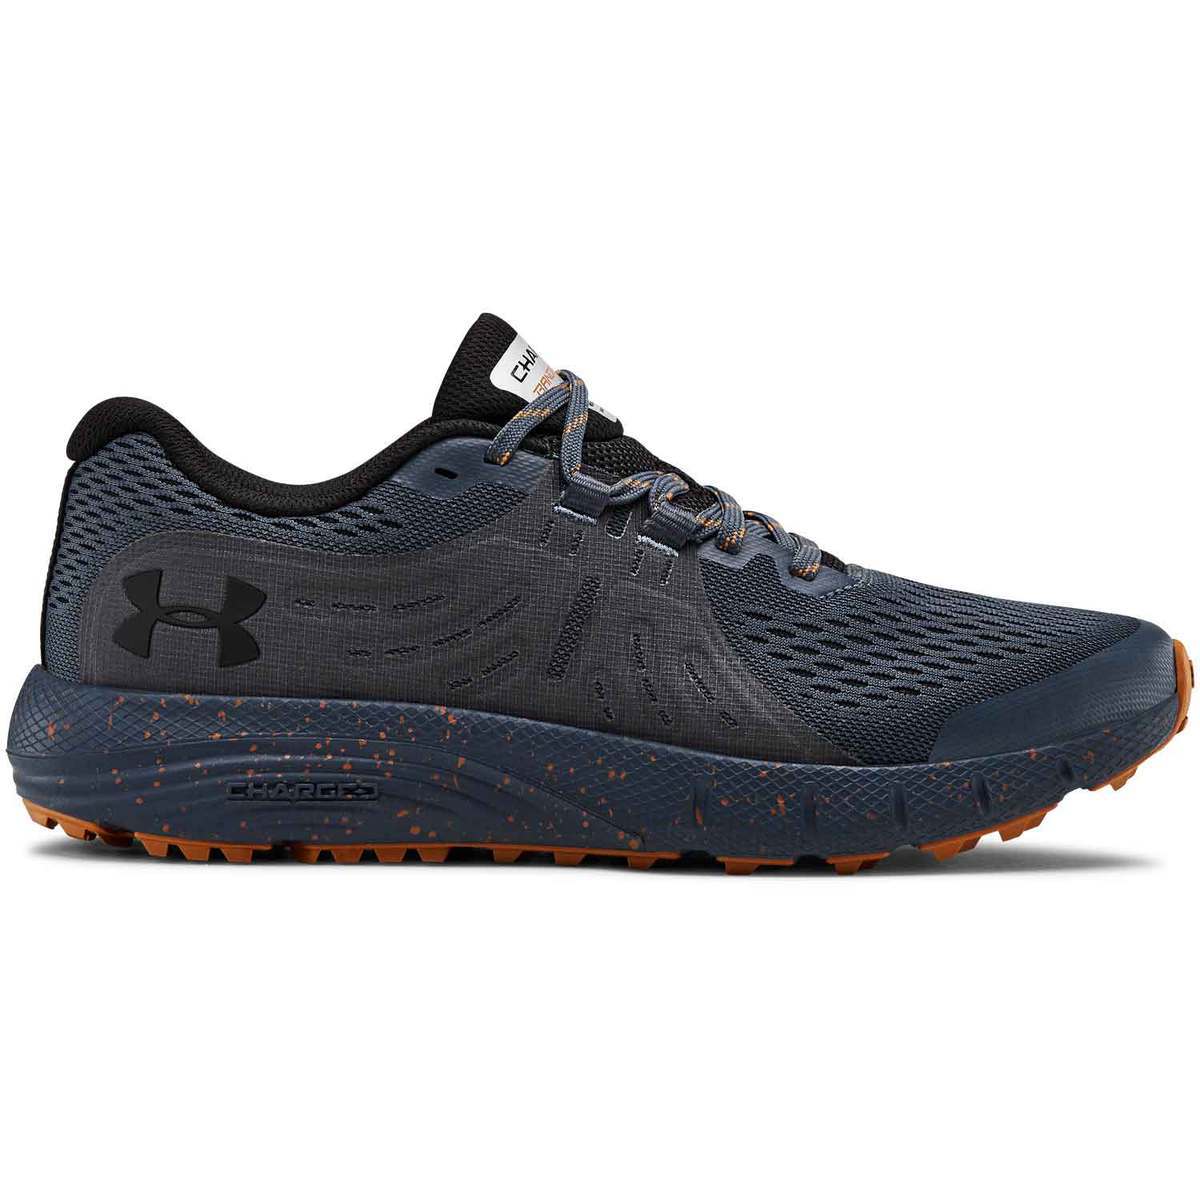 Under Armour Men's Charged Bandit Trail Running Shoes - Wire - Size 13 ...